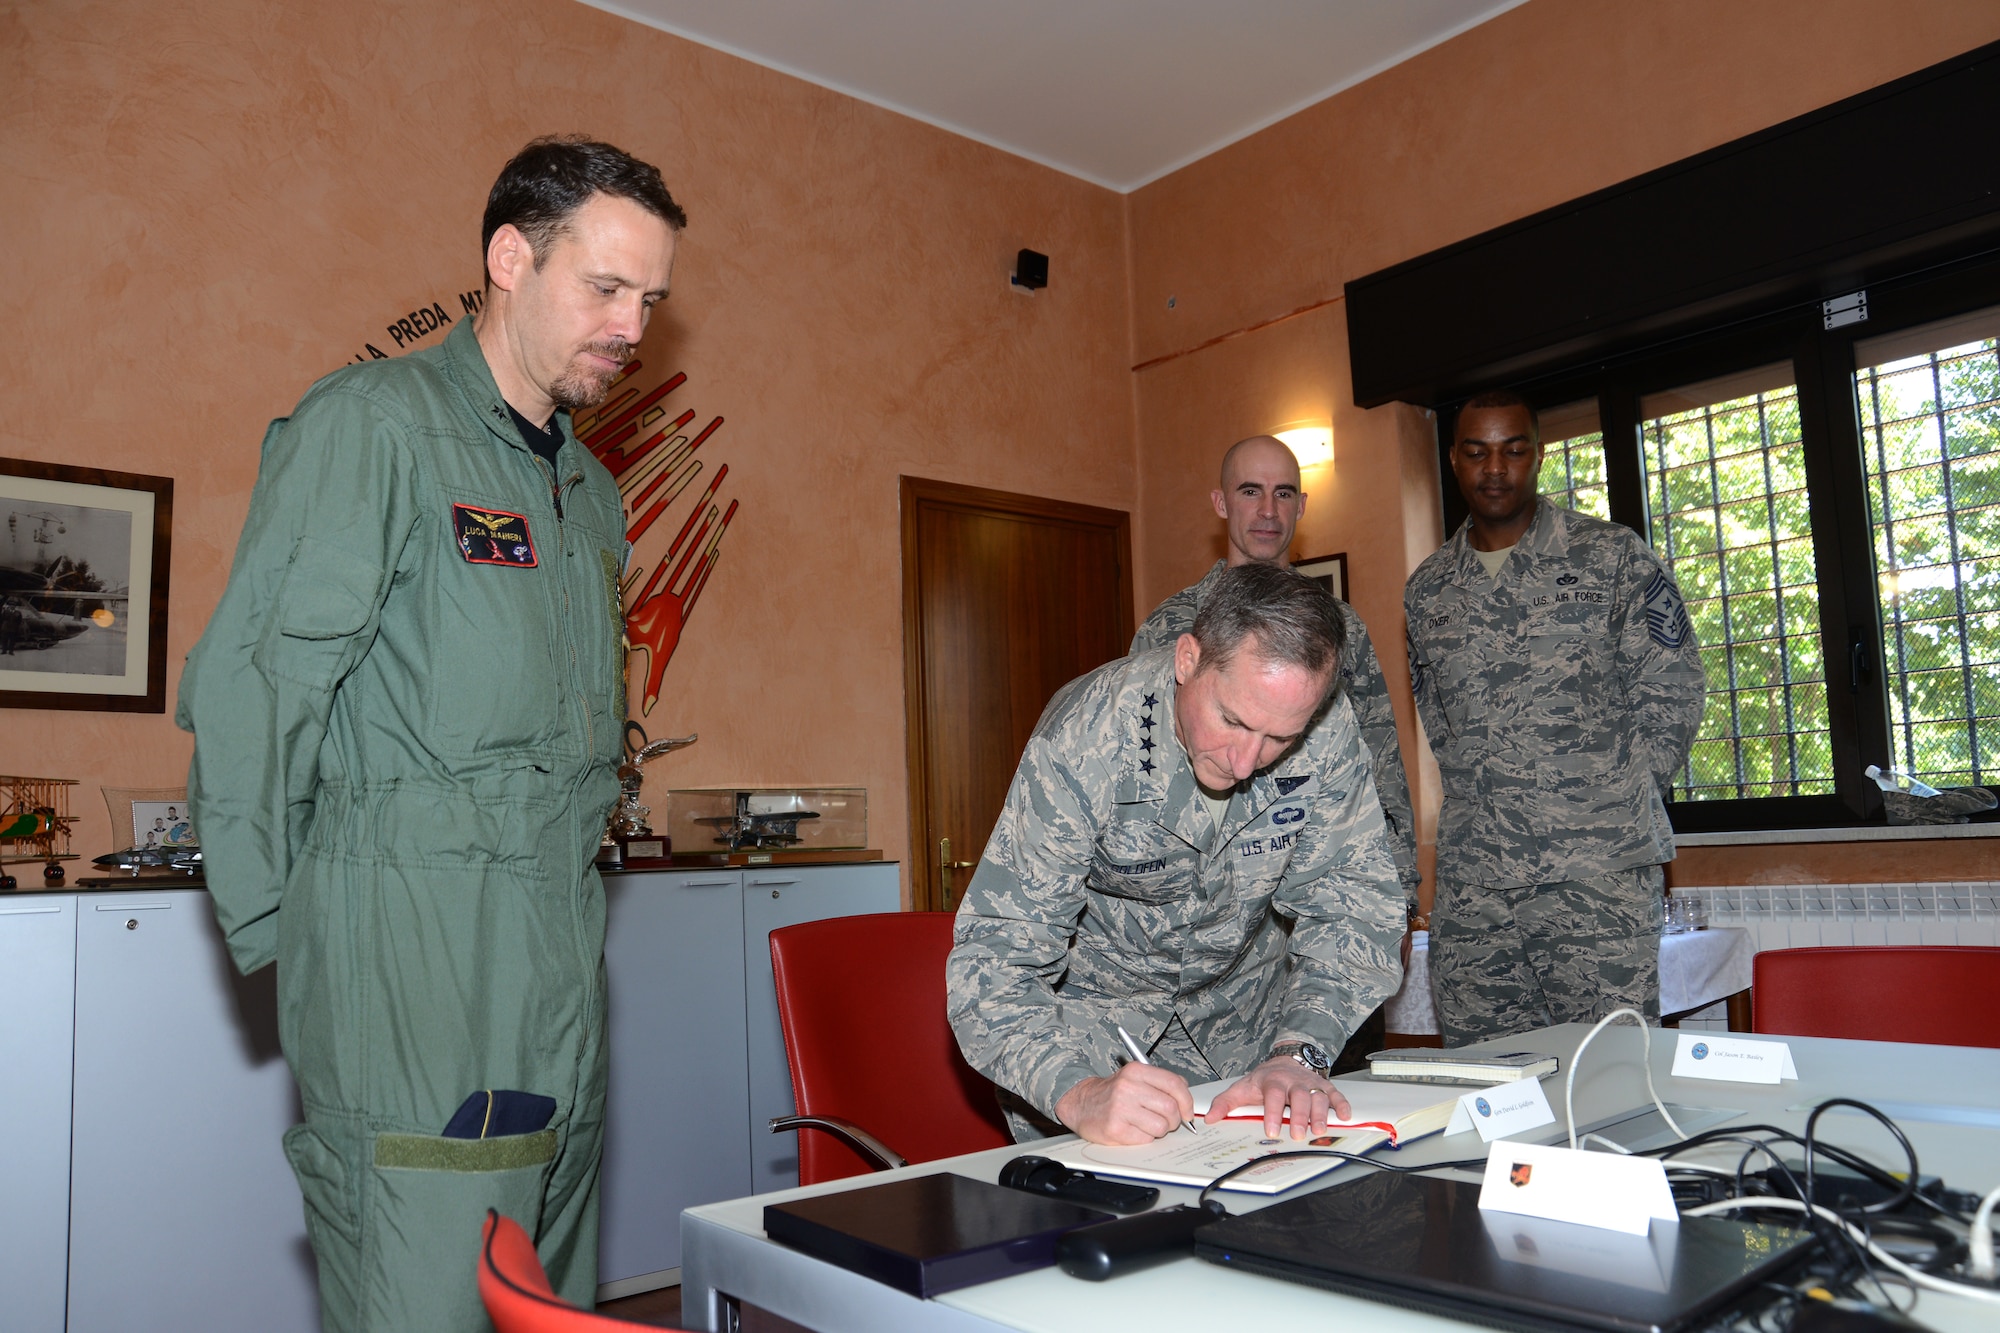 Italian Air Force Col. Luca Maineri, commander of NATO’s 6th Stormo Wing, observes as U.S. Chief of Staff of the Air Force Gen. David L. Goldfein signs a guest of honor book during his visit to Ghedi Air Base, Italy, July 9, 2018. There, he received a base tour that included the 704th Munitions Support Squadron, a geographically separated unit assigned to the 52nd Fighter Wing at Spangdahlem AB, Germany. (Courtesy photo)